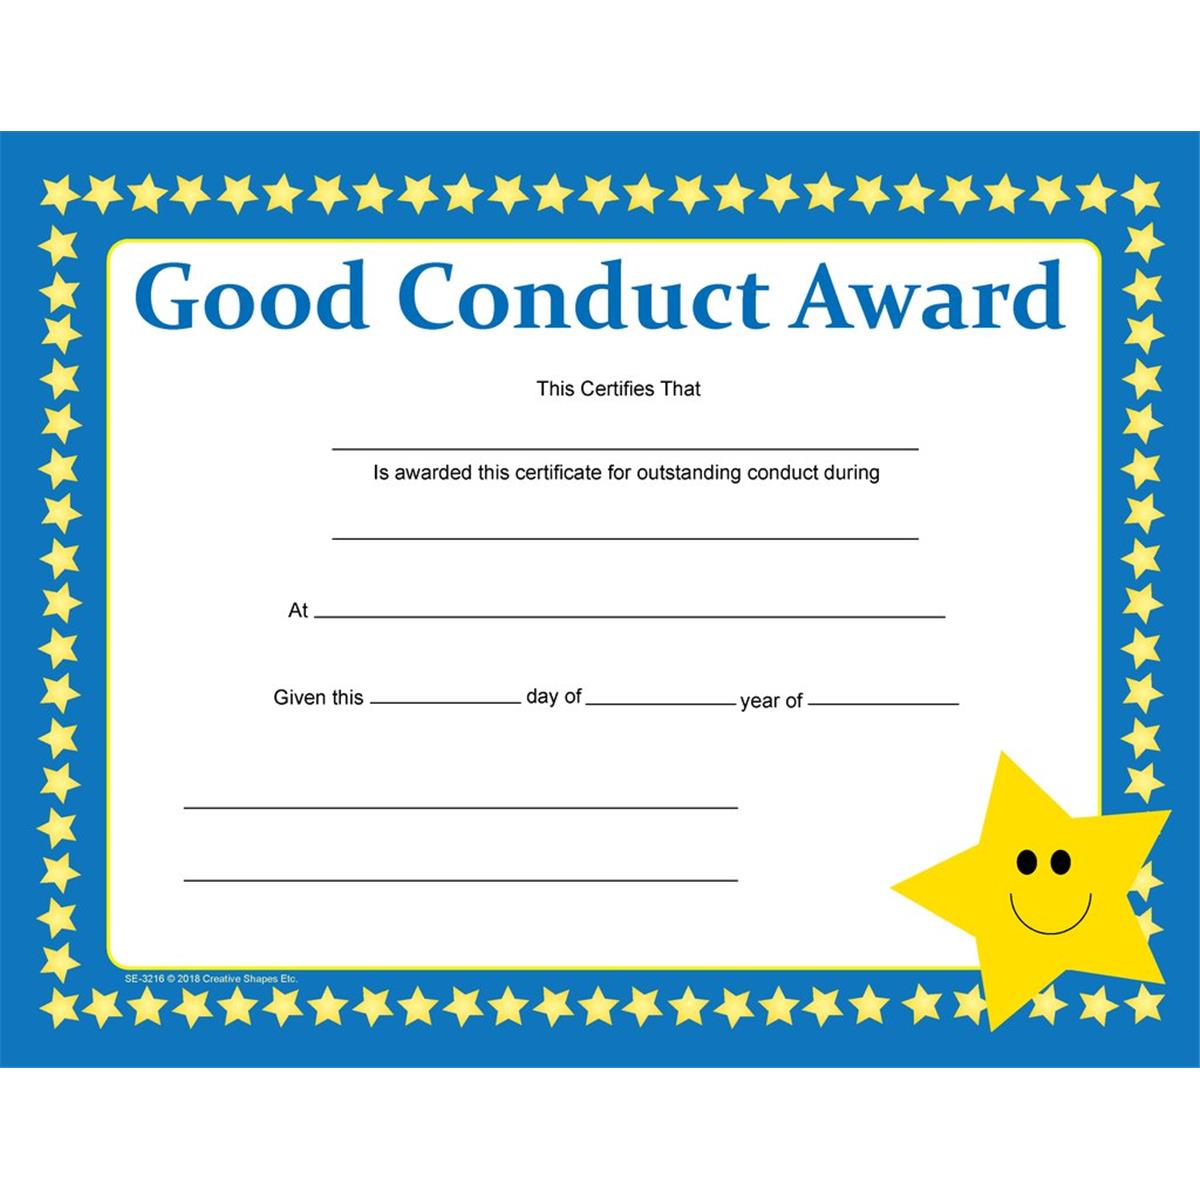 Se-3216 8.5 X 11 In. Good Conduct Certificate - 30 Sheets Per Pack